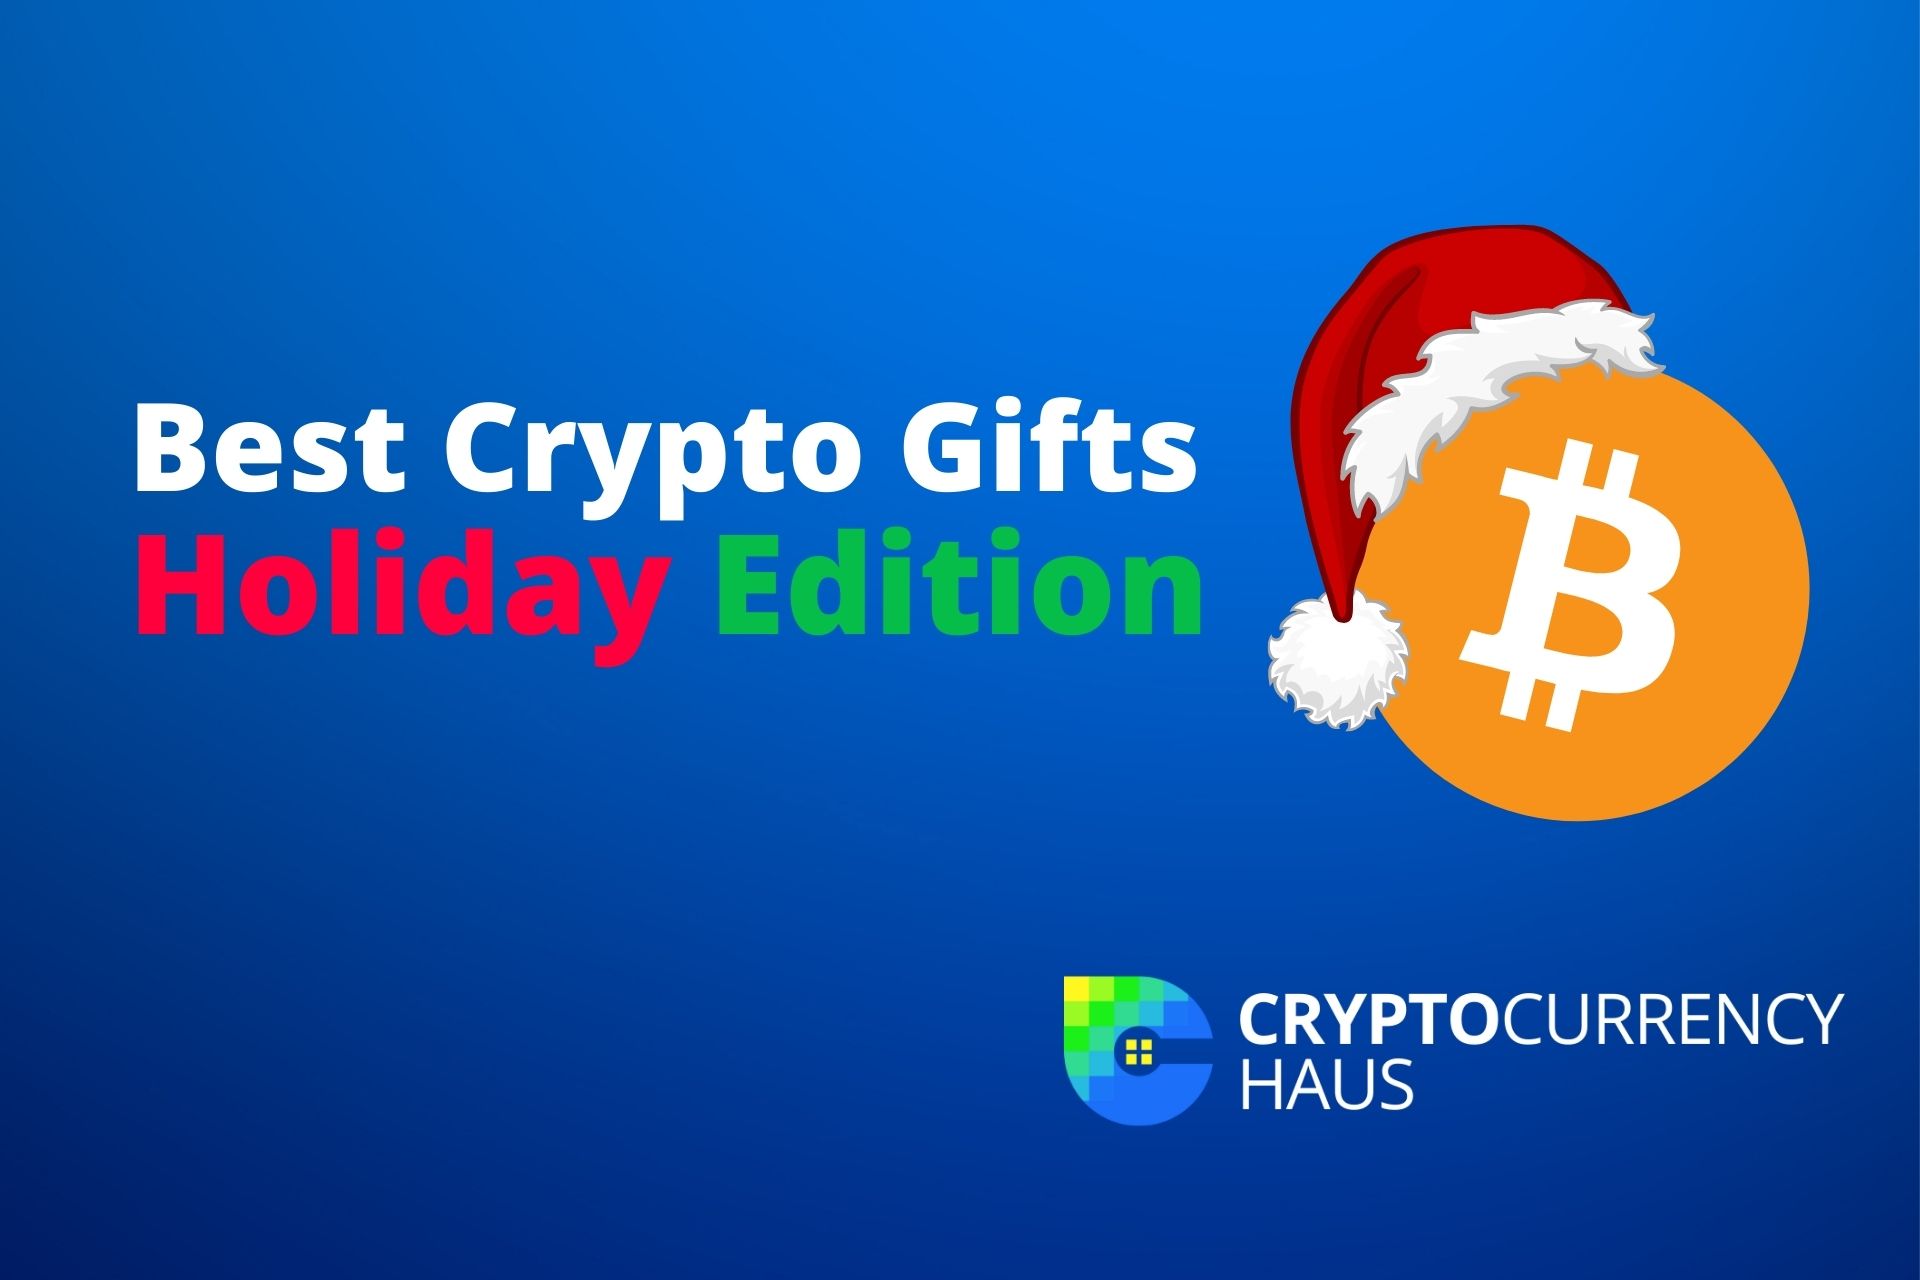 can you buy crypto as a gift